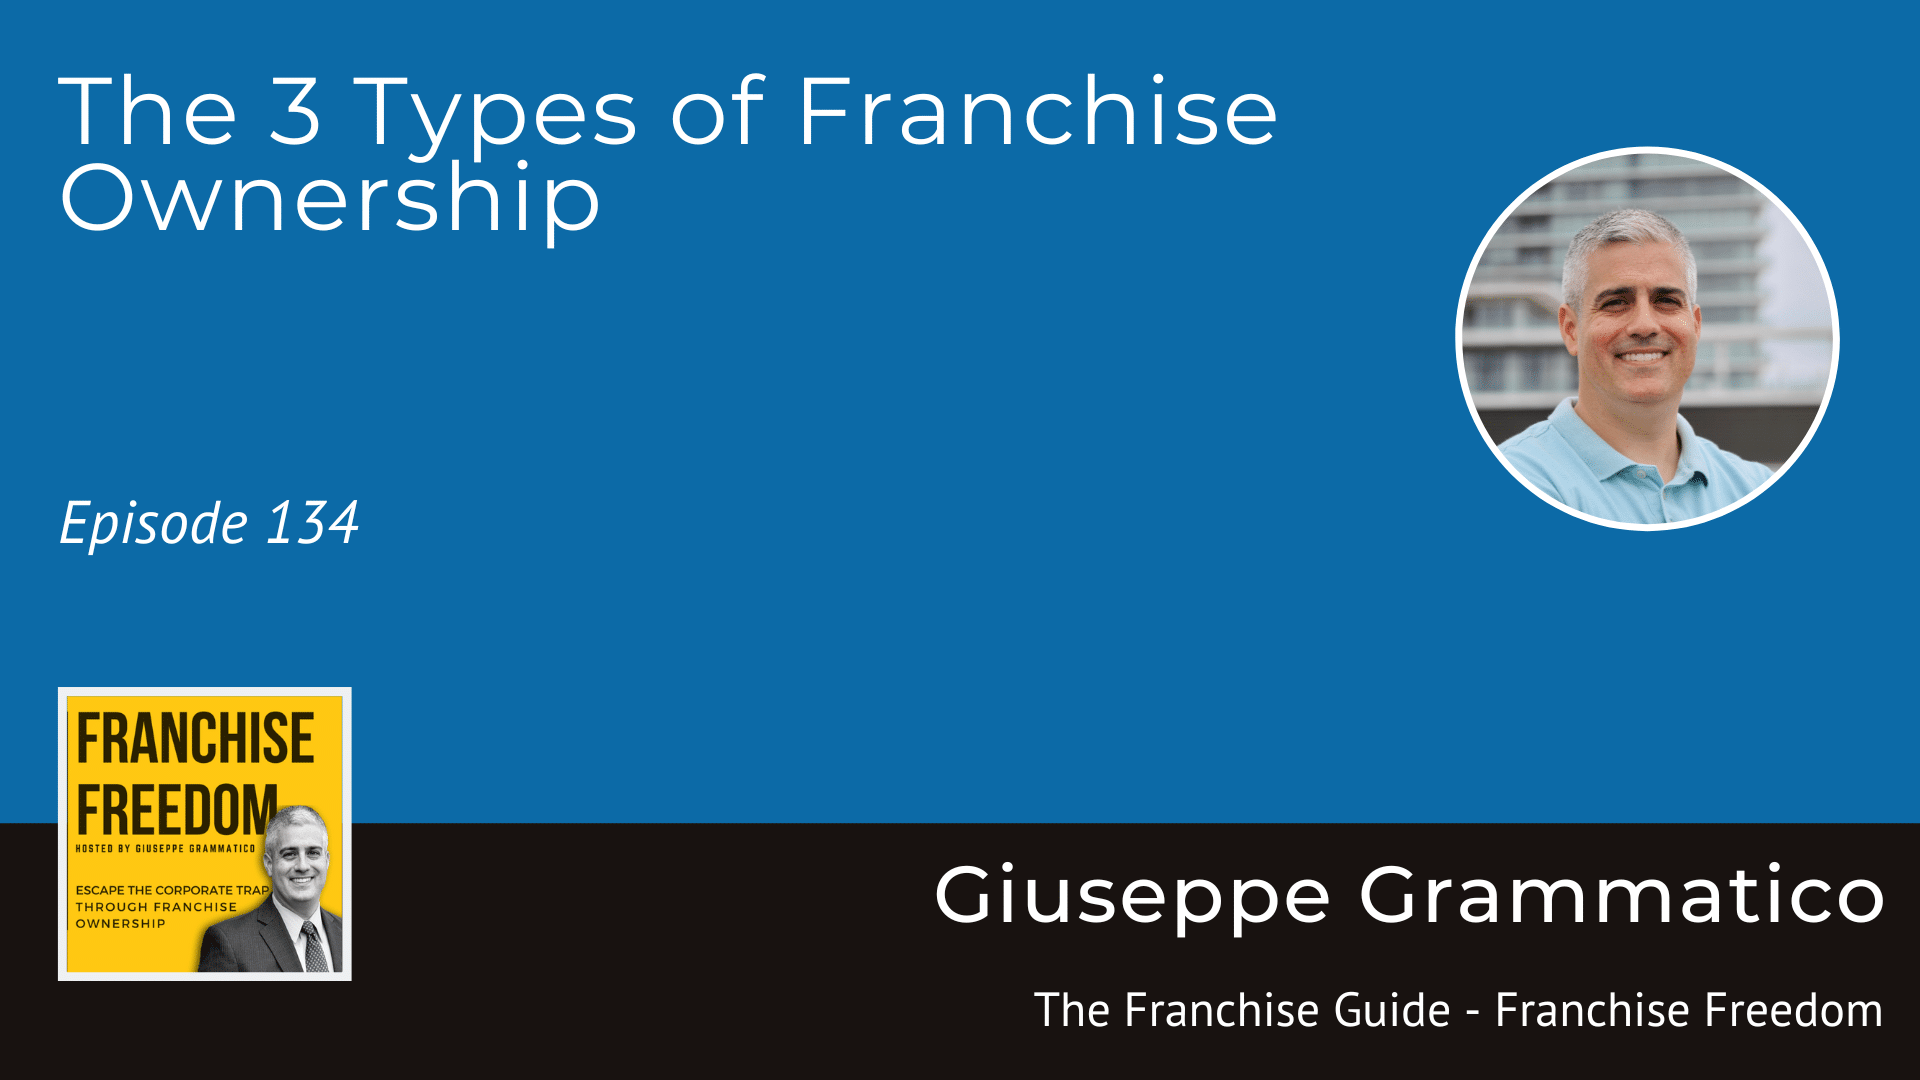 The 3 Types of Franchise Ownership